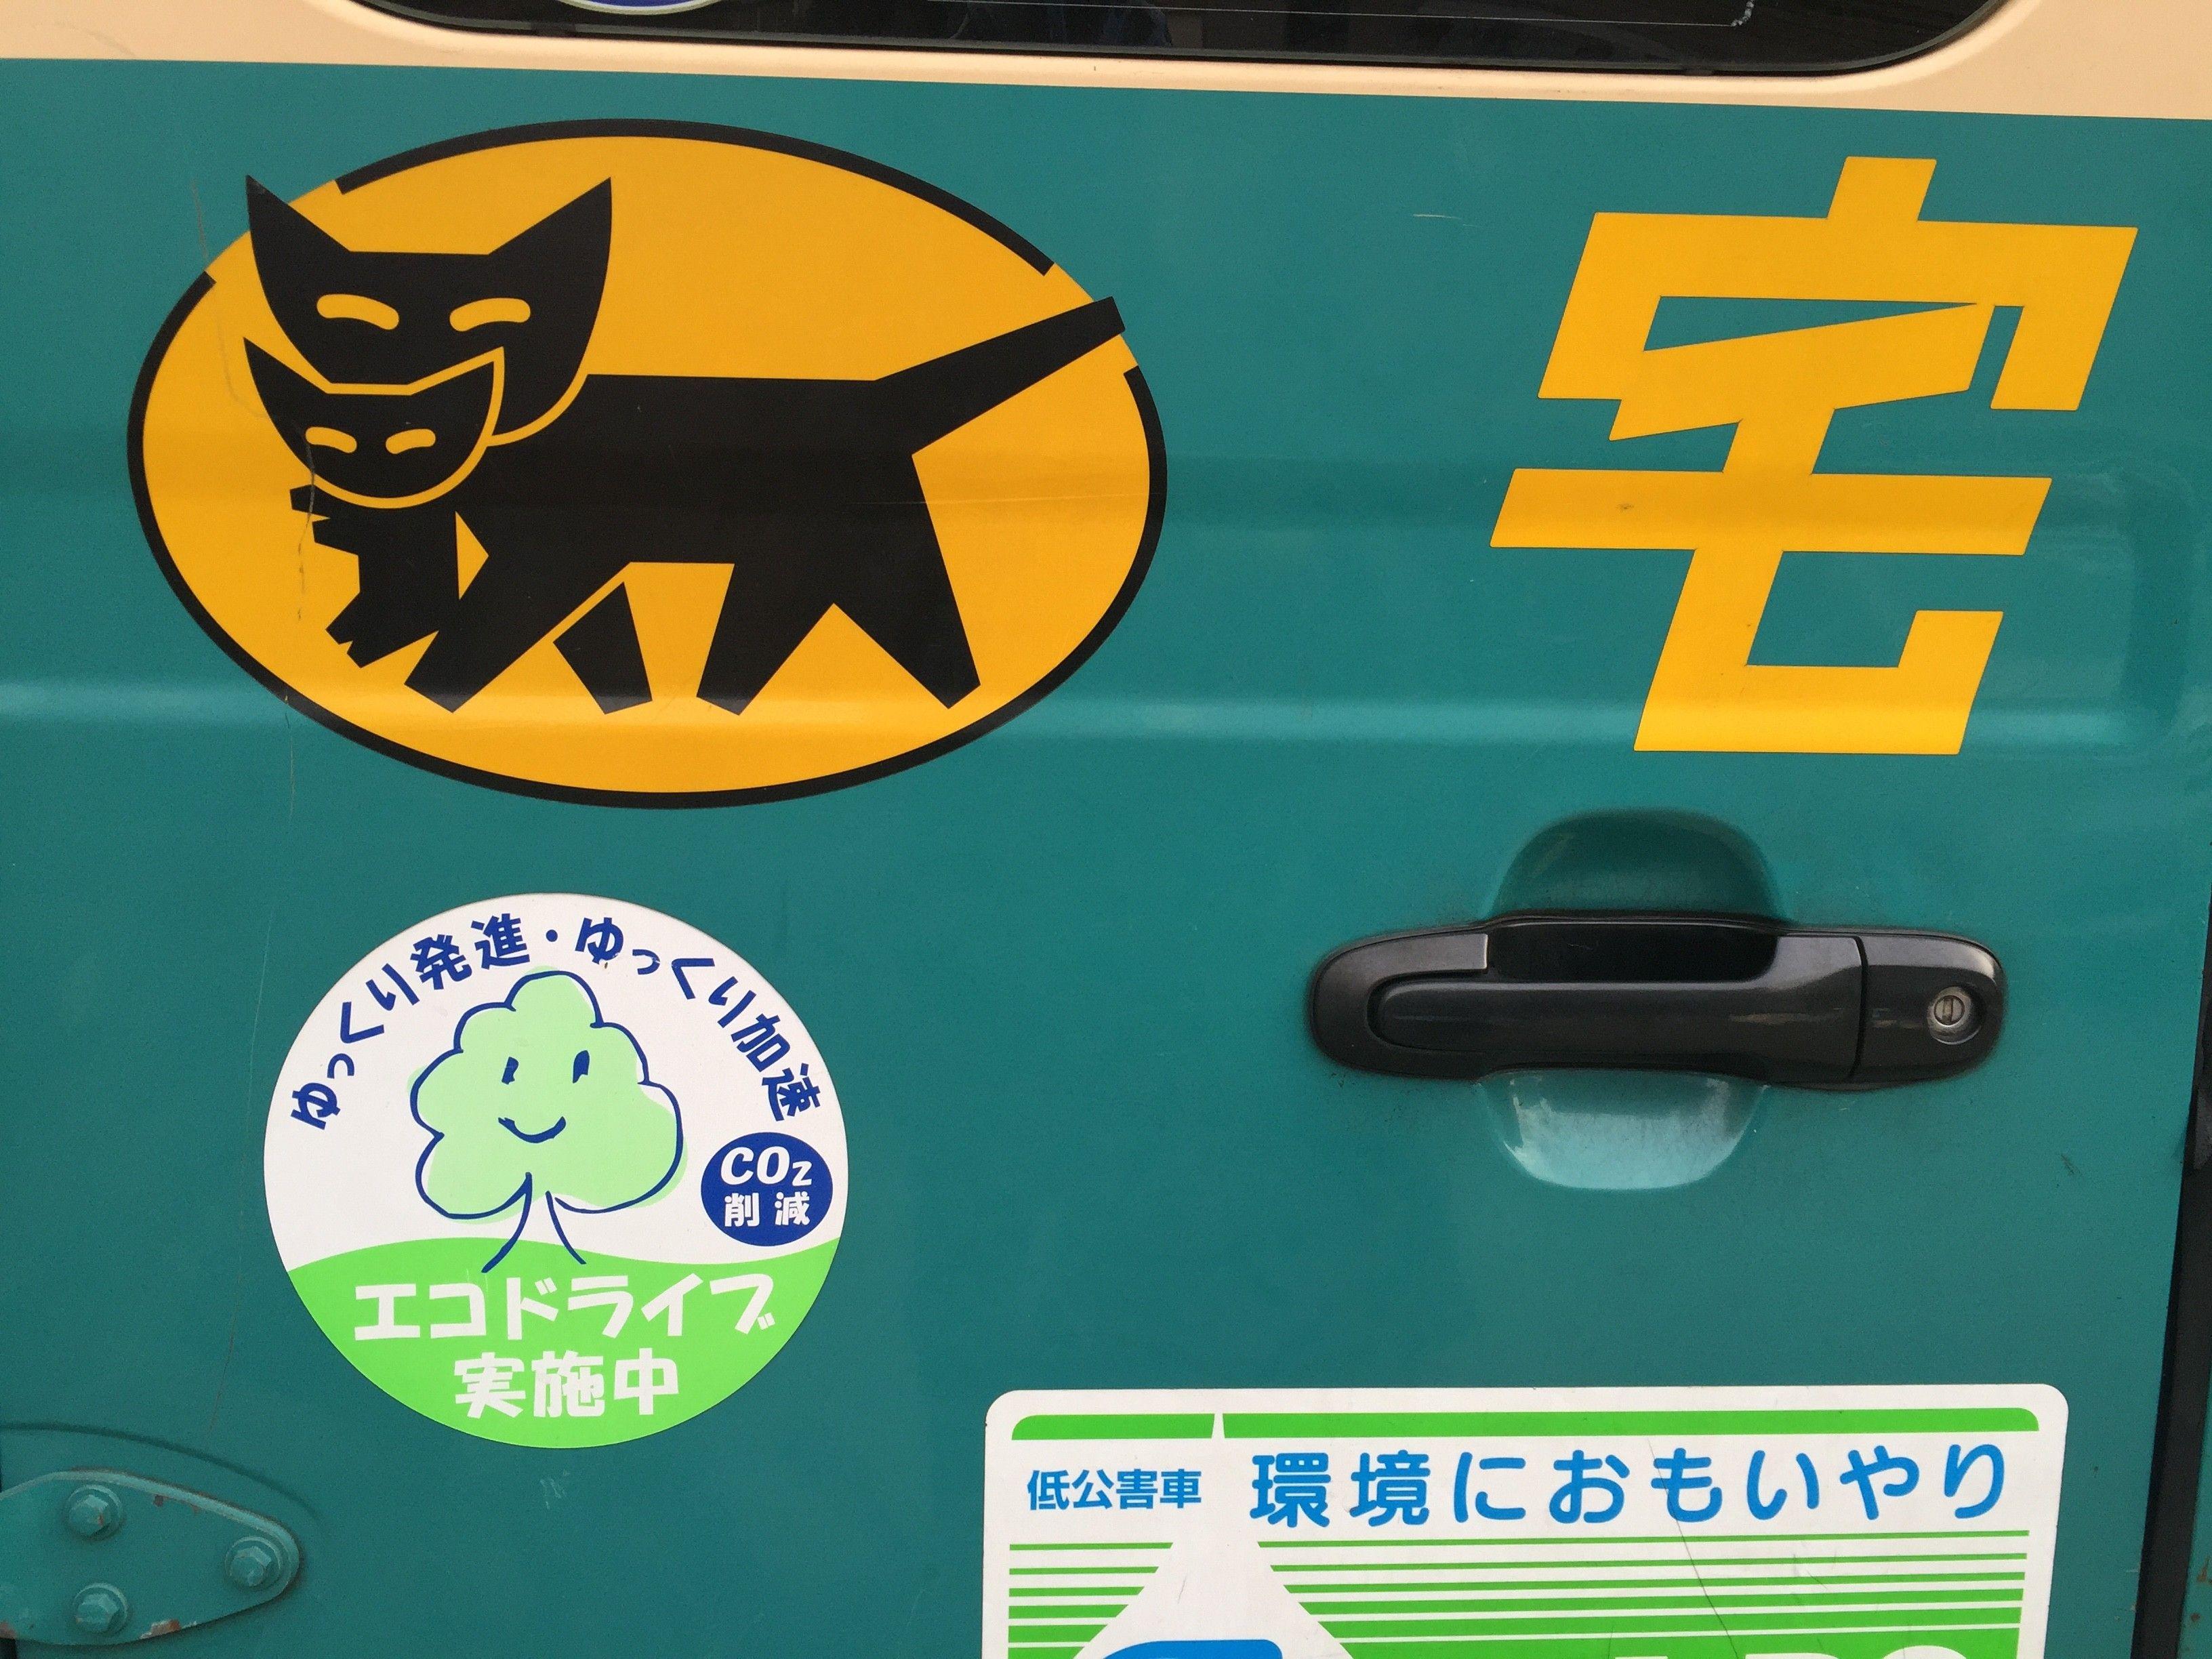 Famous Cat Logo - Life in Japan: Just ship it! Efficiency in logistics and travel